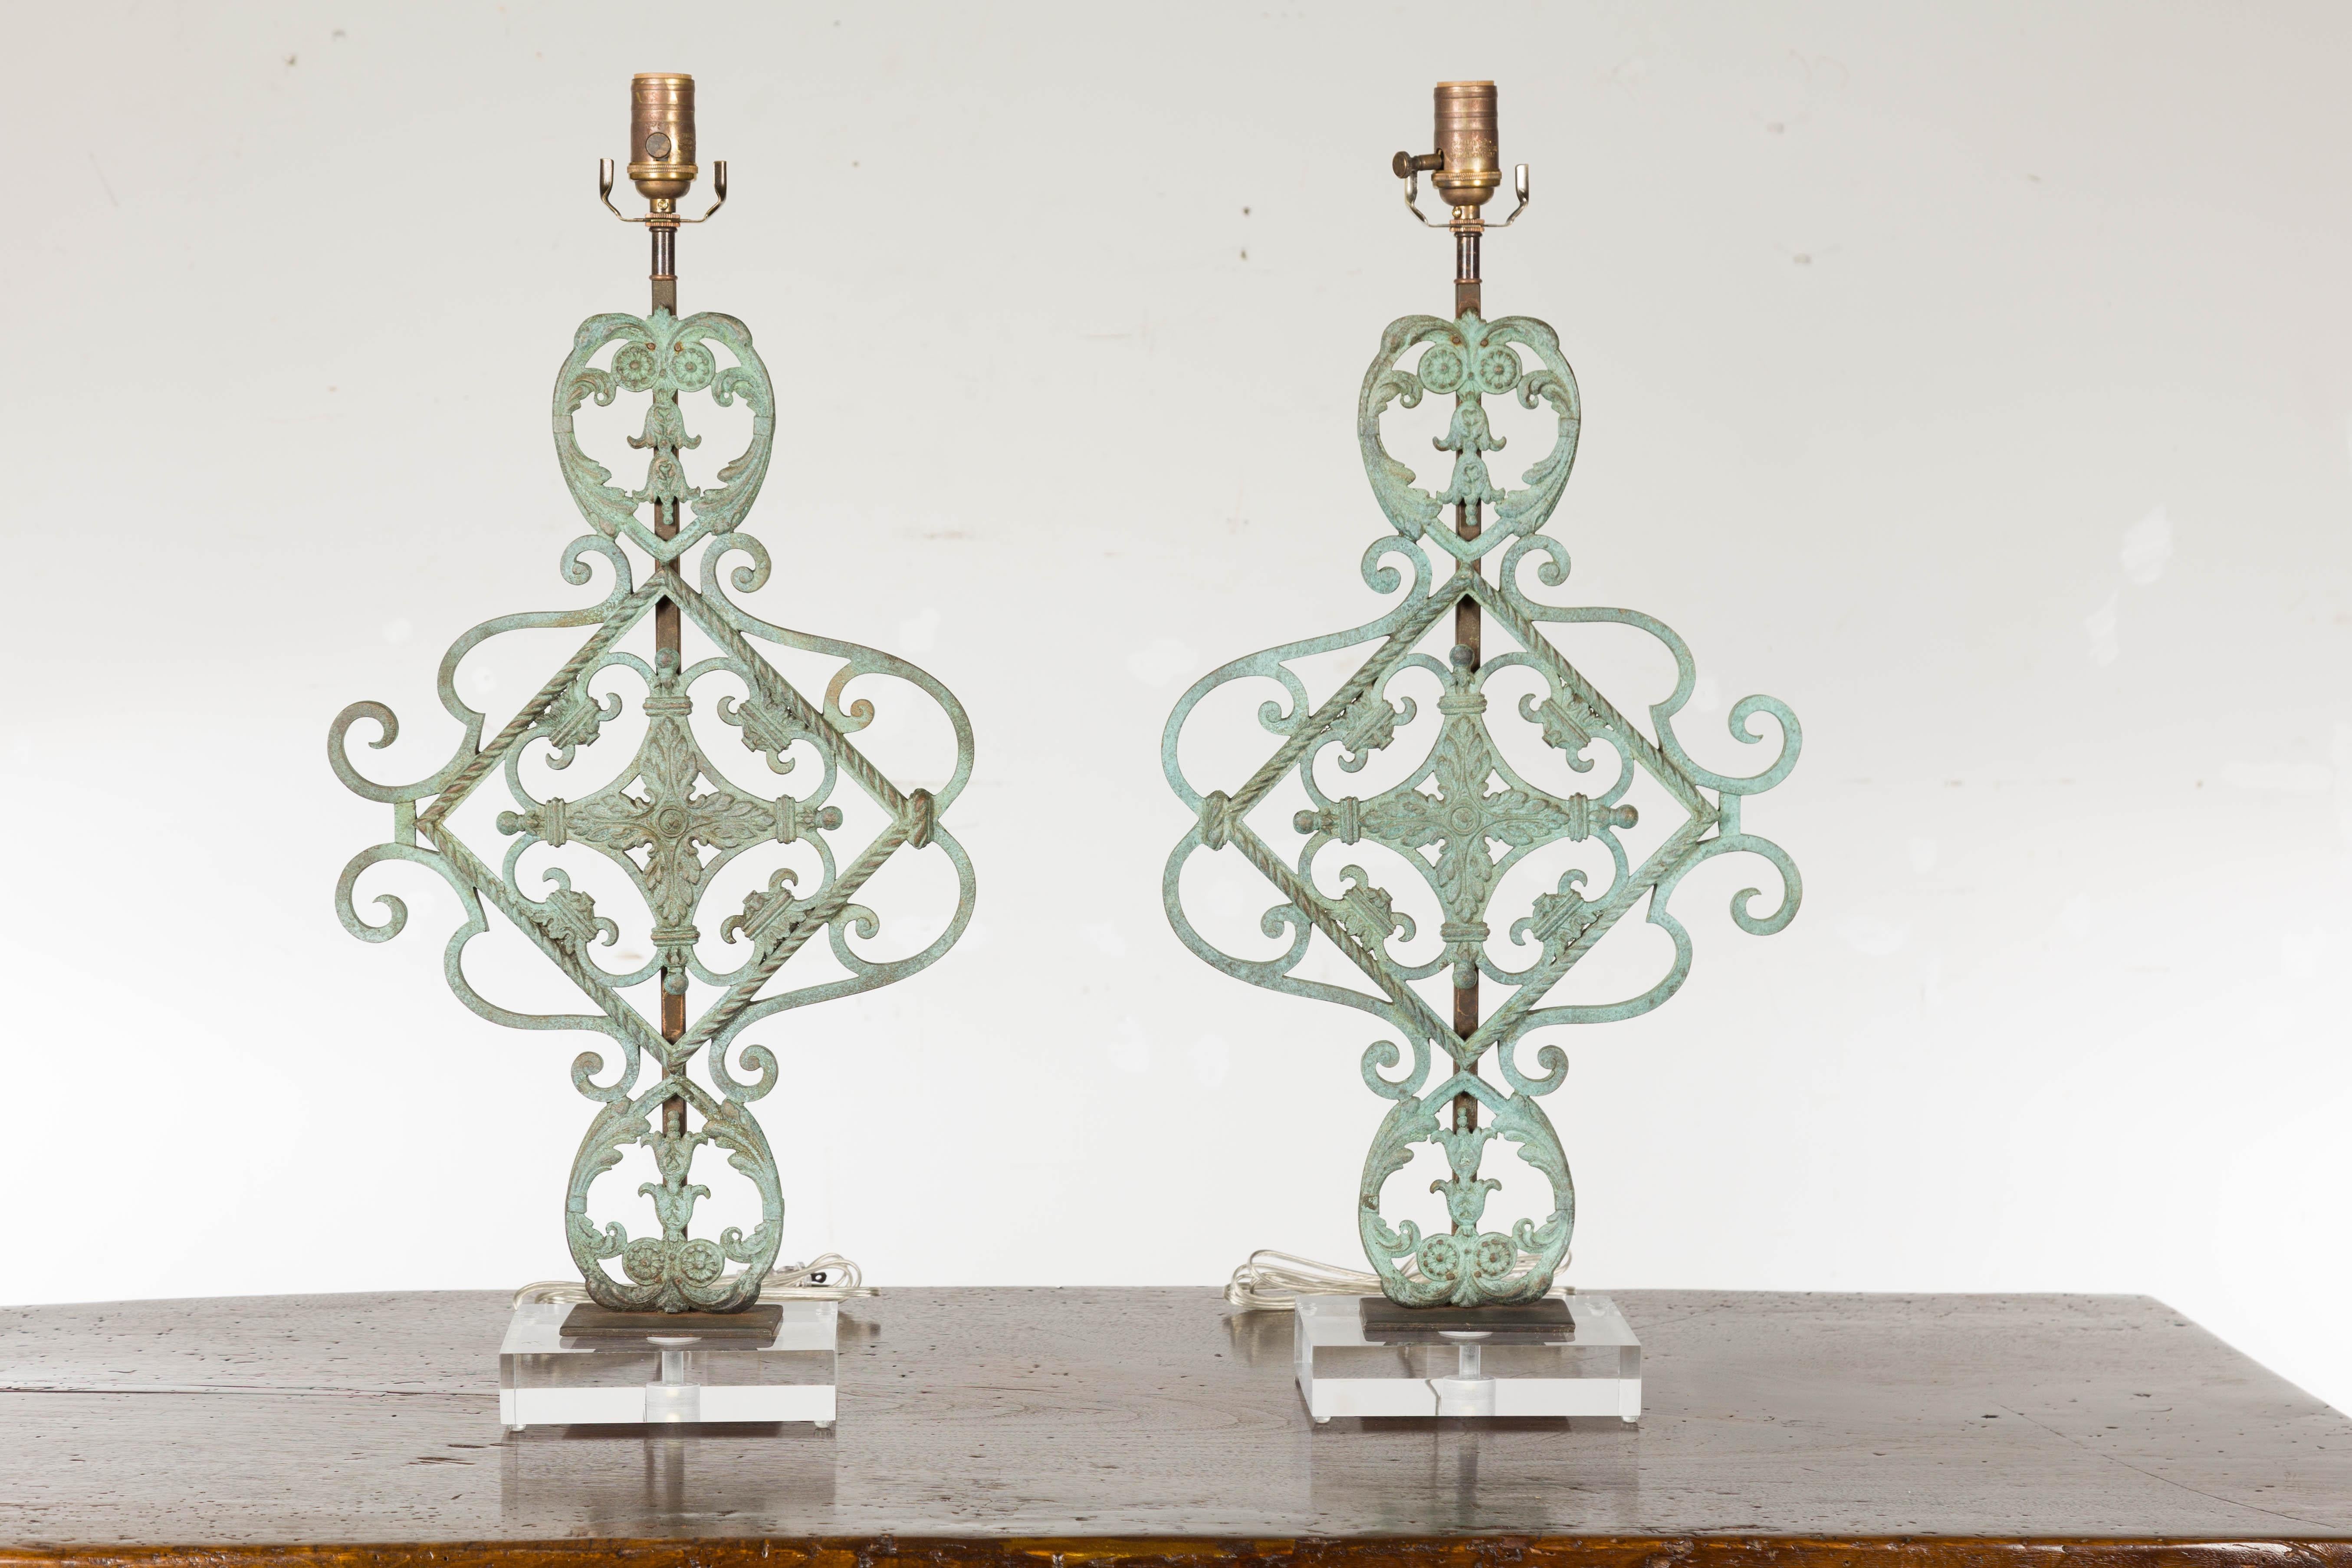 Italian Bronze Midcentury Table Lamps with Scrolling Motifs, on Lucite Bases In Good Condition For Sale In Atlanta, GA